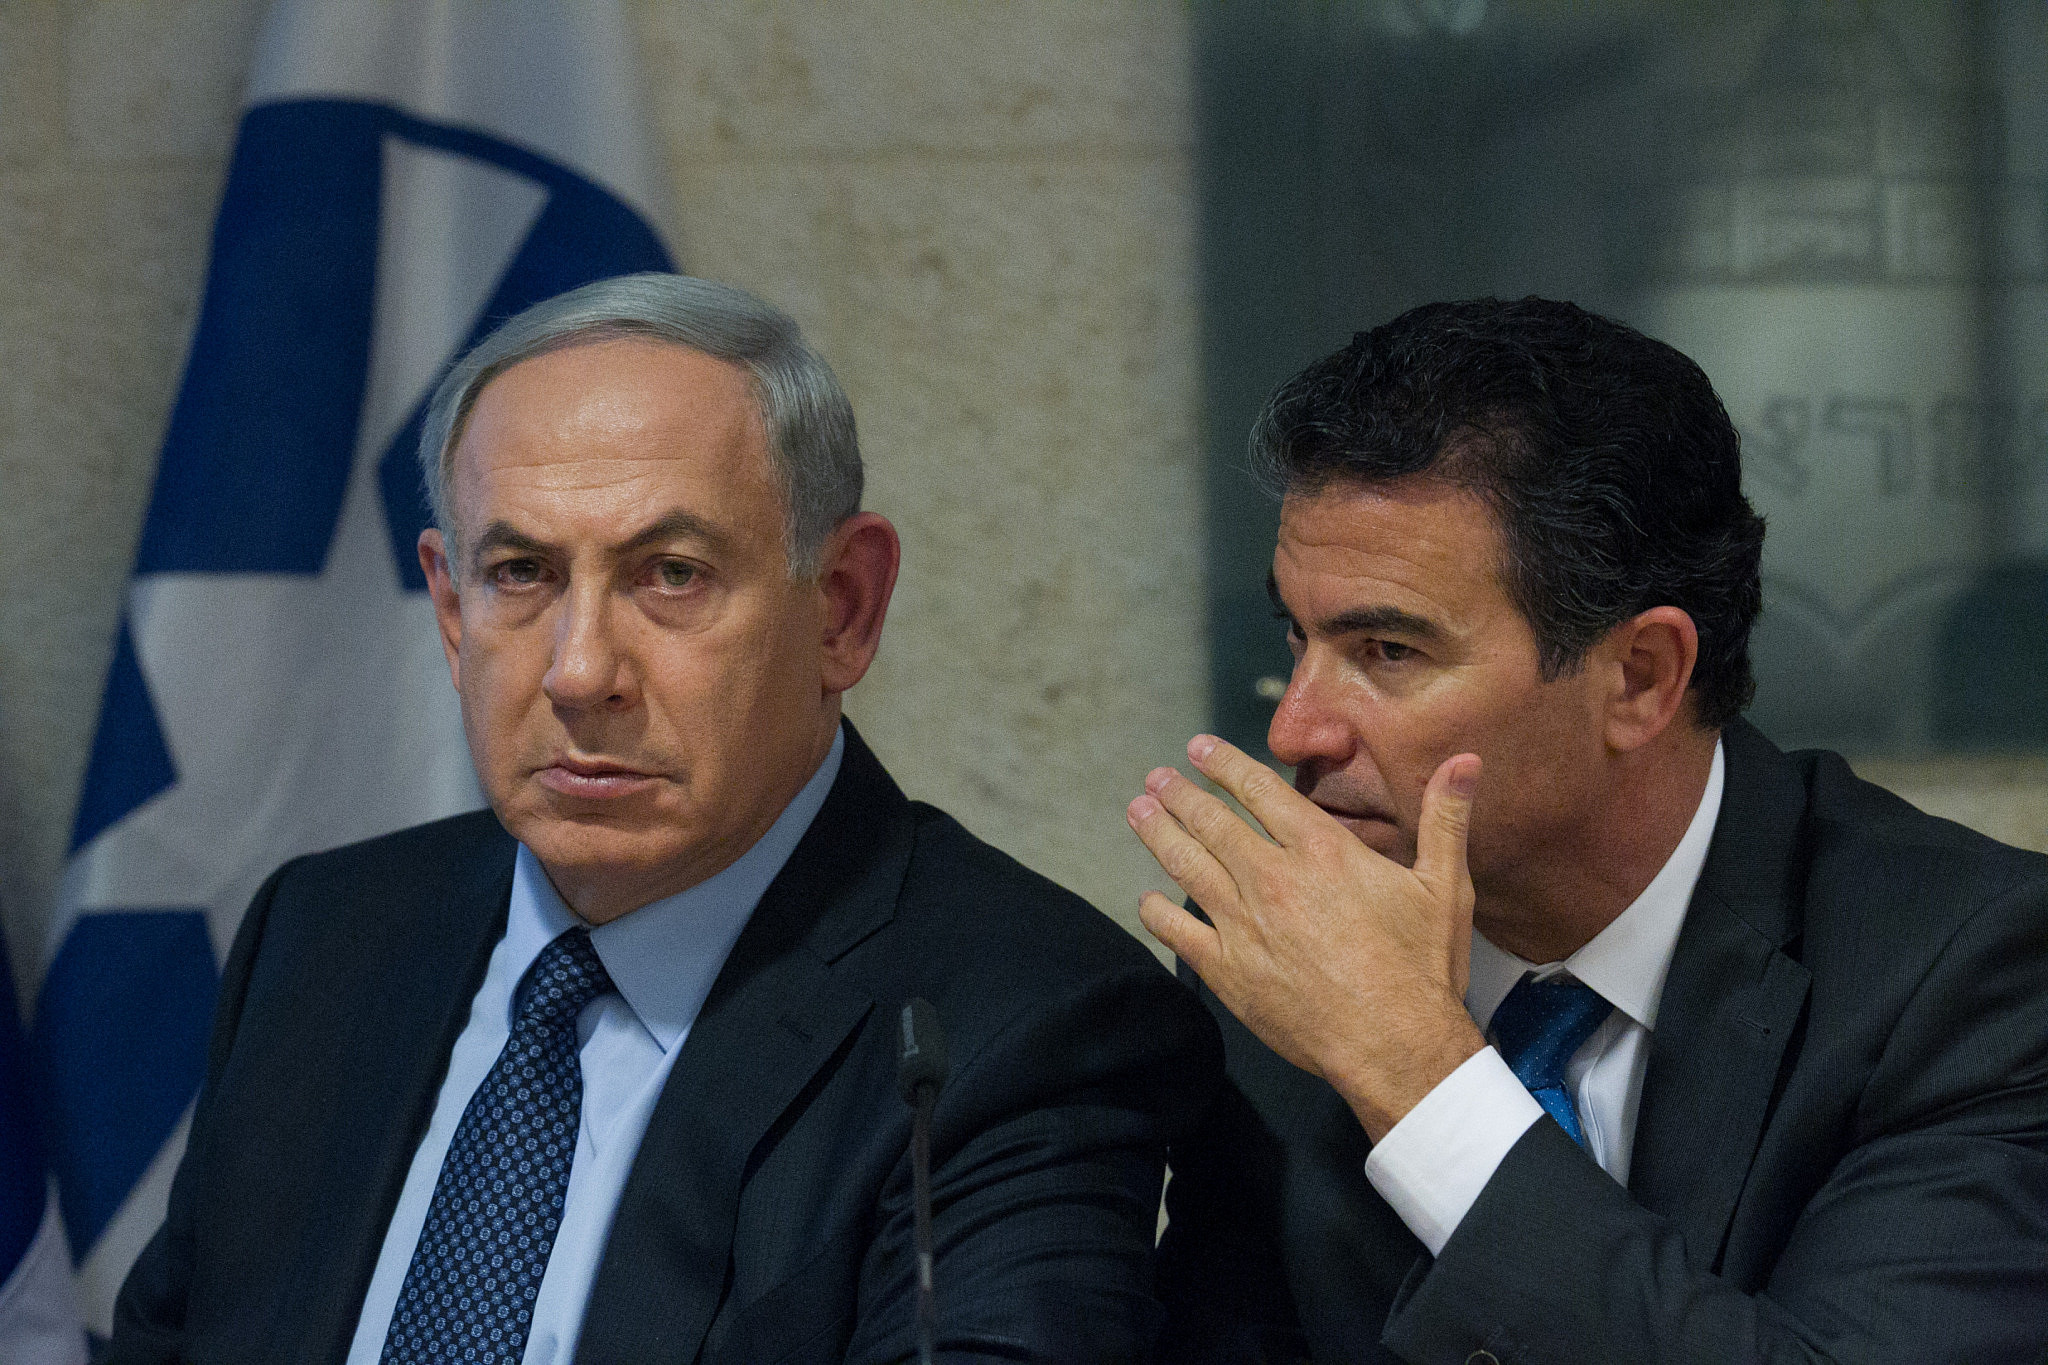 Prime Minister Benjamin Netanyahu, seen with Yossi Cohen, then-head of the national security council, at a press conference at the Foreign Ministry in Jerusalem, October 15, 2015. (Miriam Alster/Flash90)